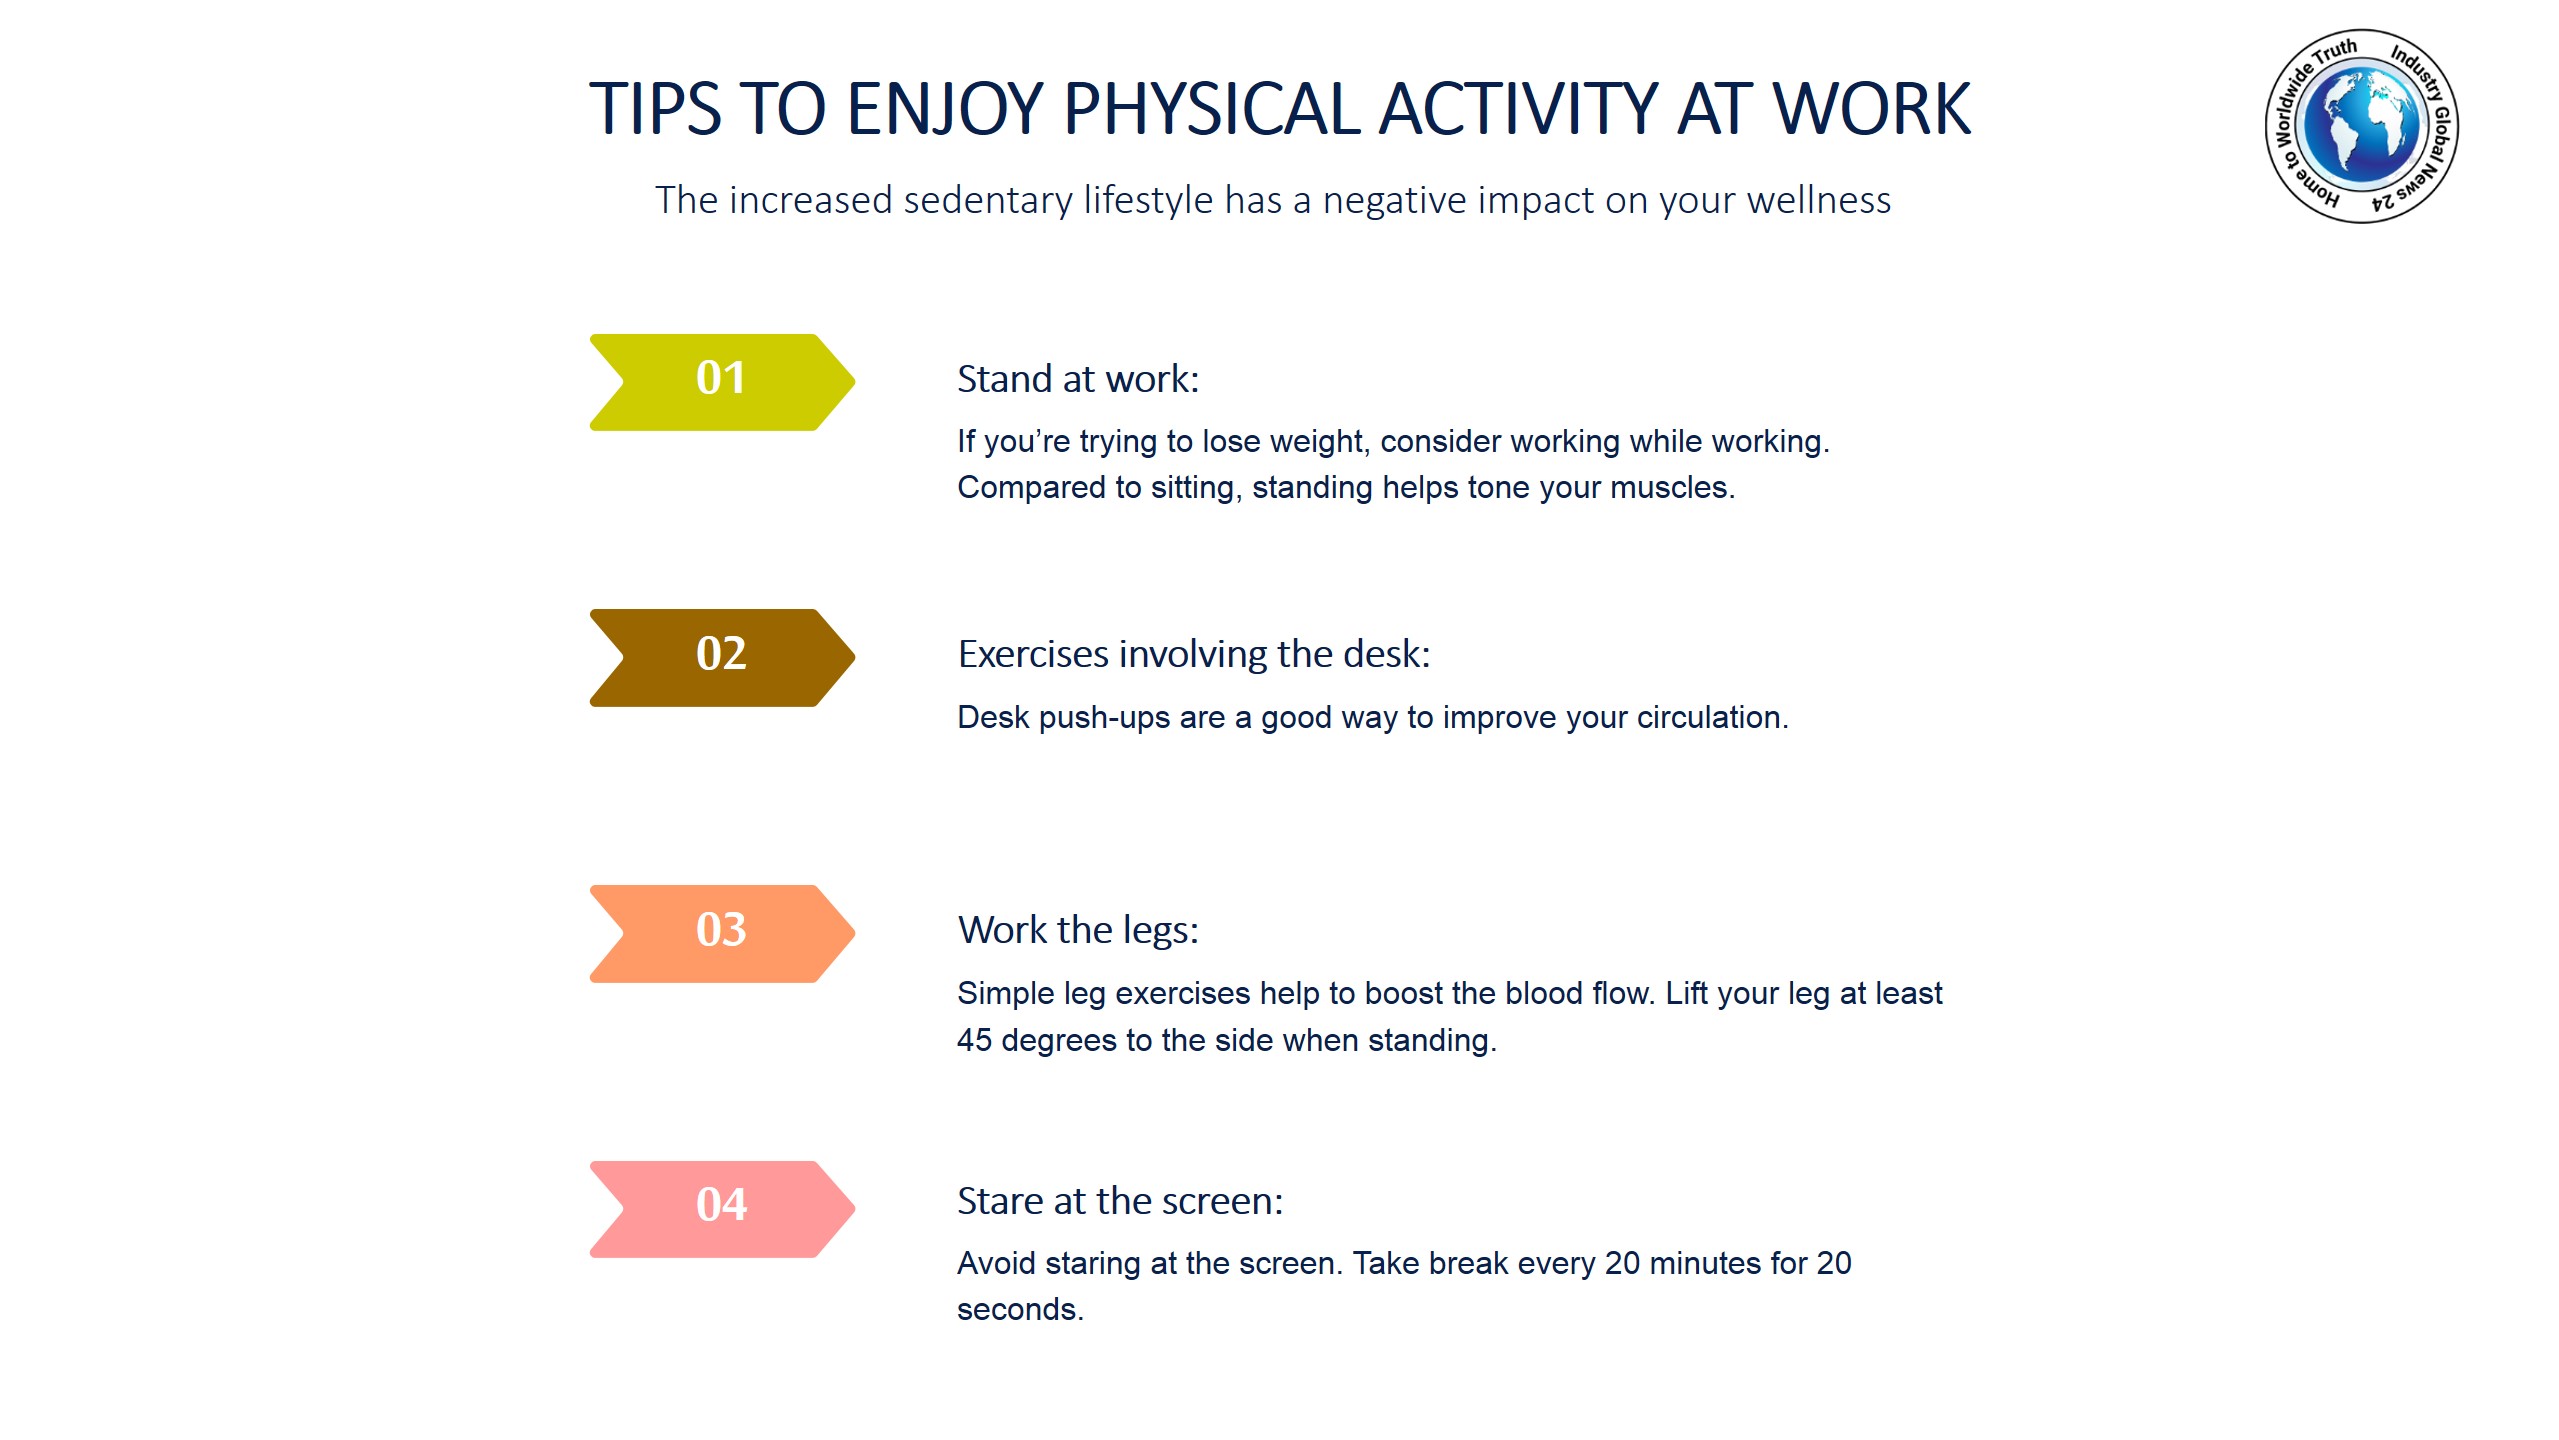 Tips to enjoy physical activity at work